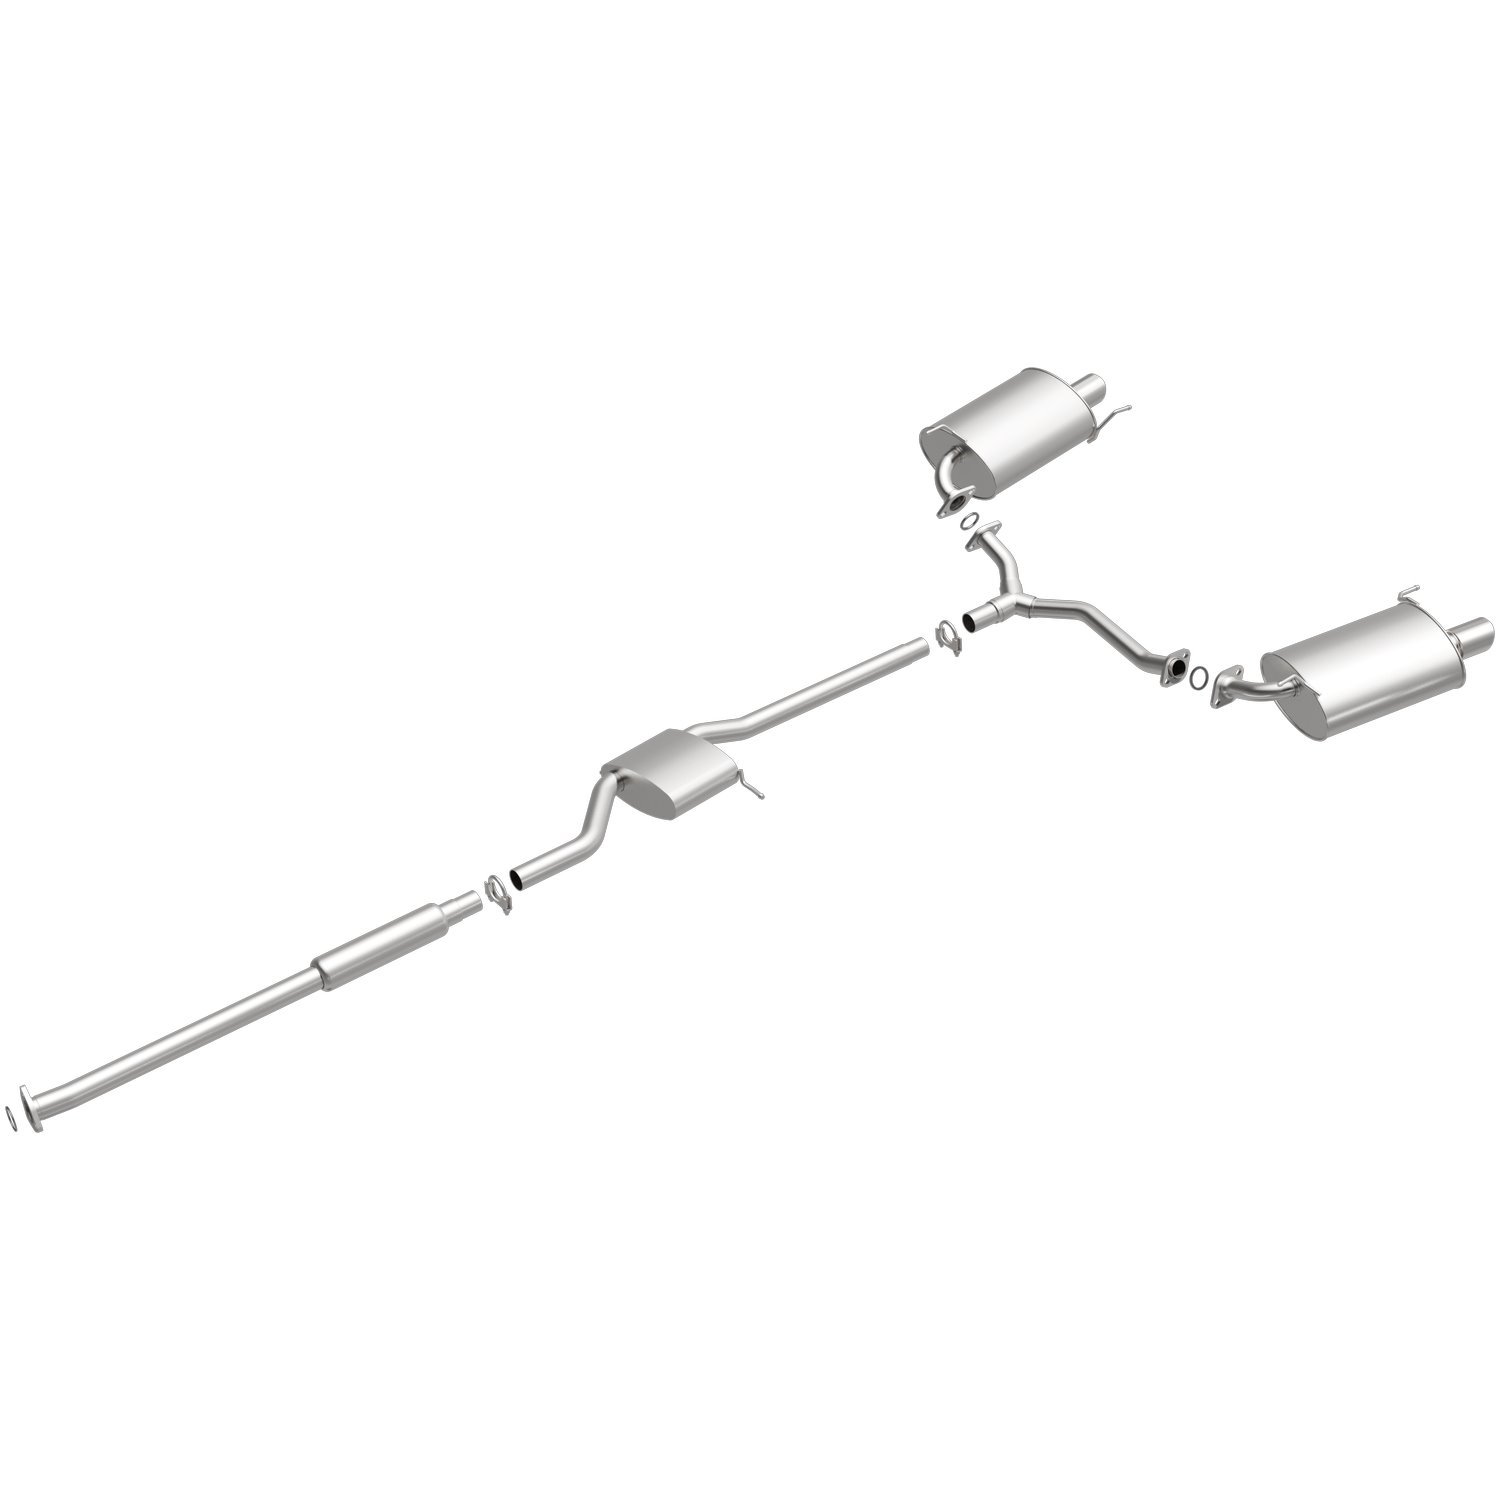 Direct-Fit Exhaust Kit, 1999-2003 Acura CL/TL 3.2L